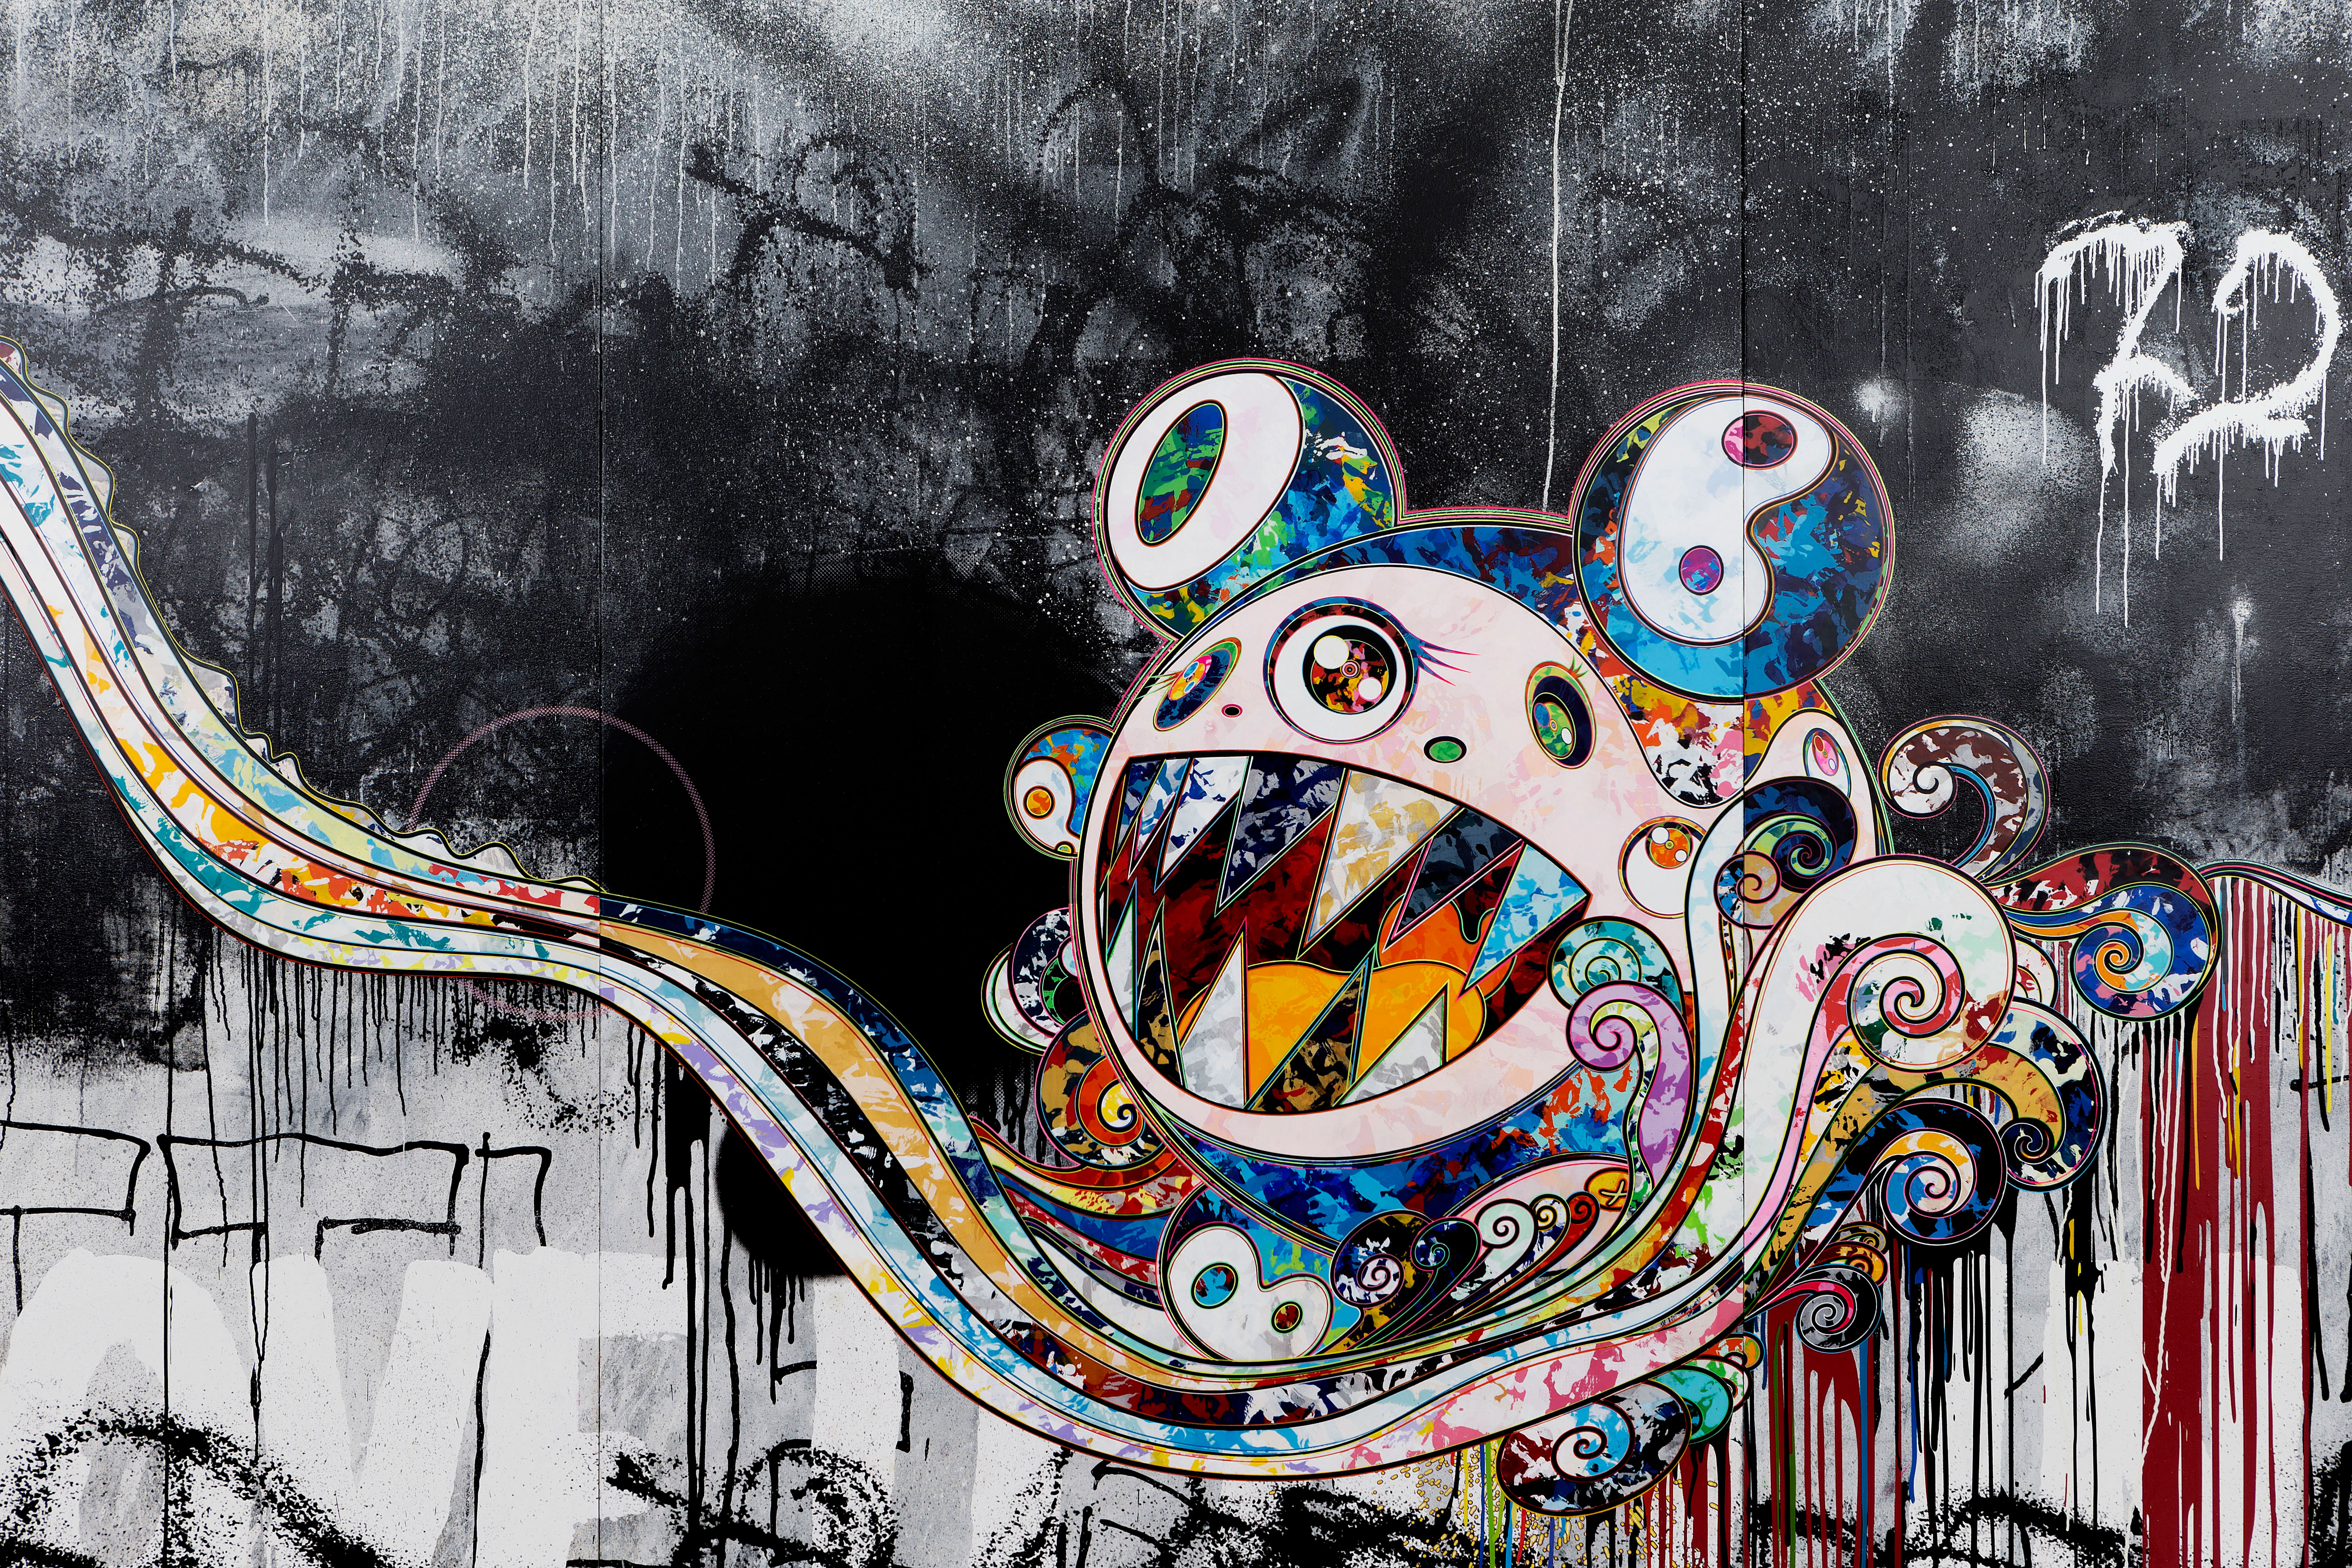 A picture I took at the Takashi Murakami Gallery at the Louis Vuitton  foundation in Paris. Its a square but I cropped for my wallpaper and it  looks reallly nice thought you